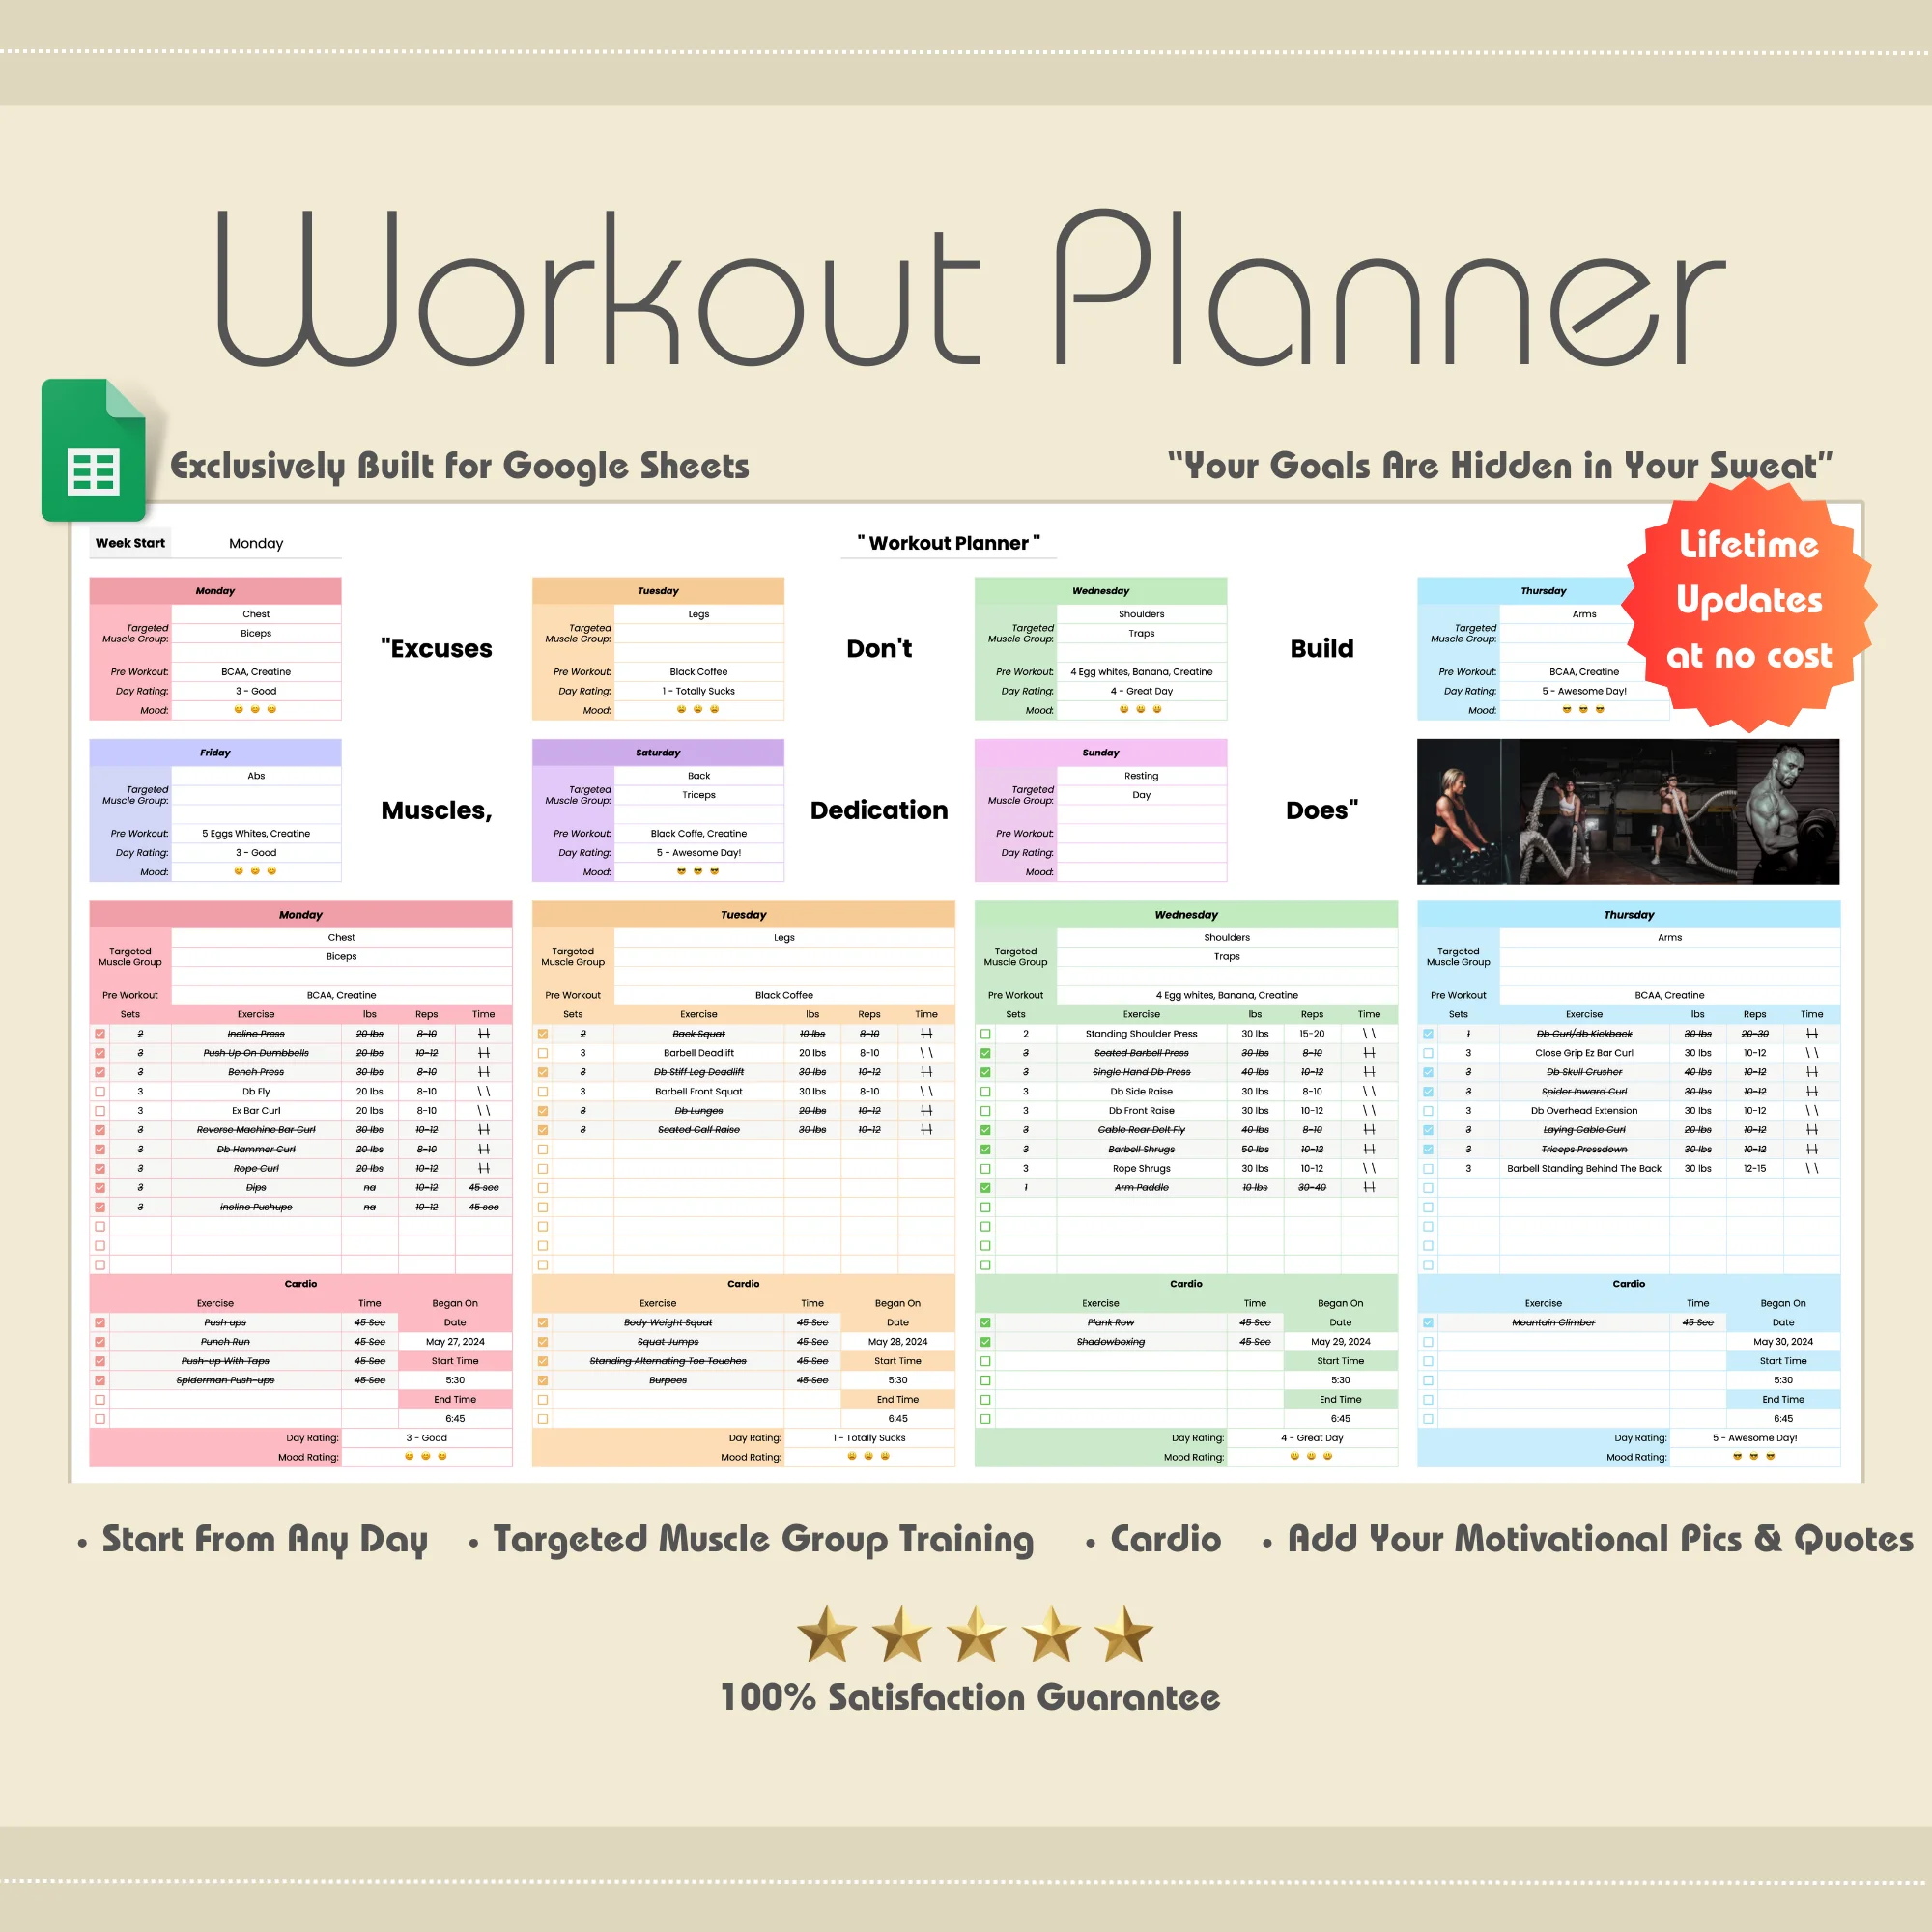 Weekly workout planner spreadsheet made for google sheets. Created by ggbuddy4u.com